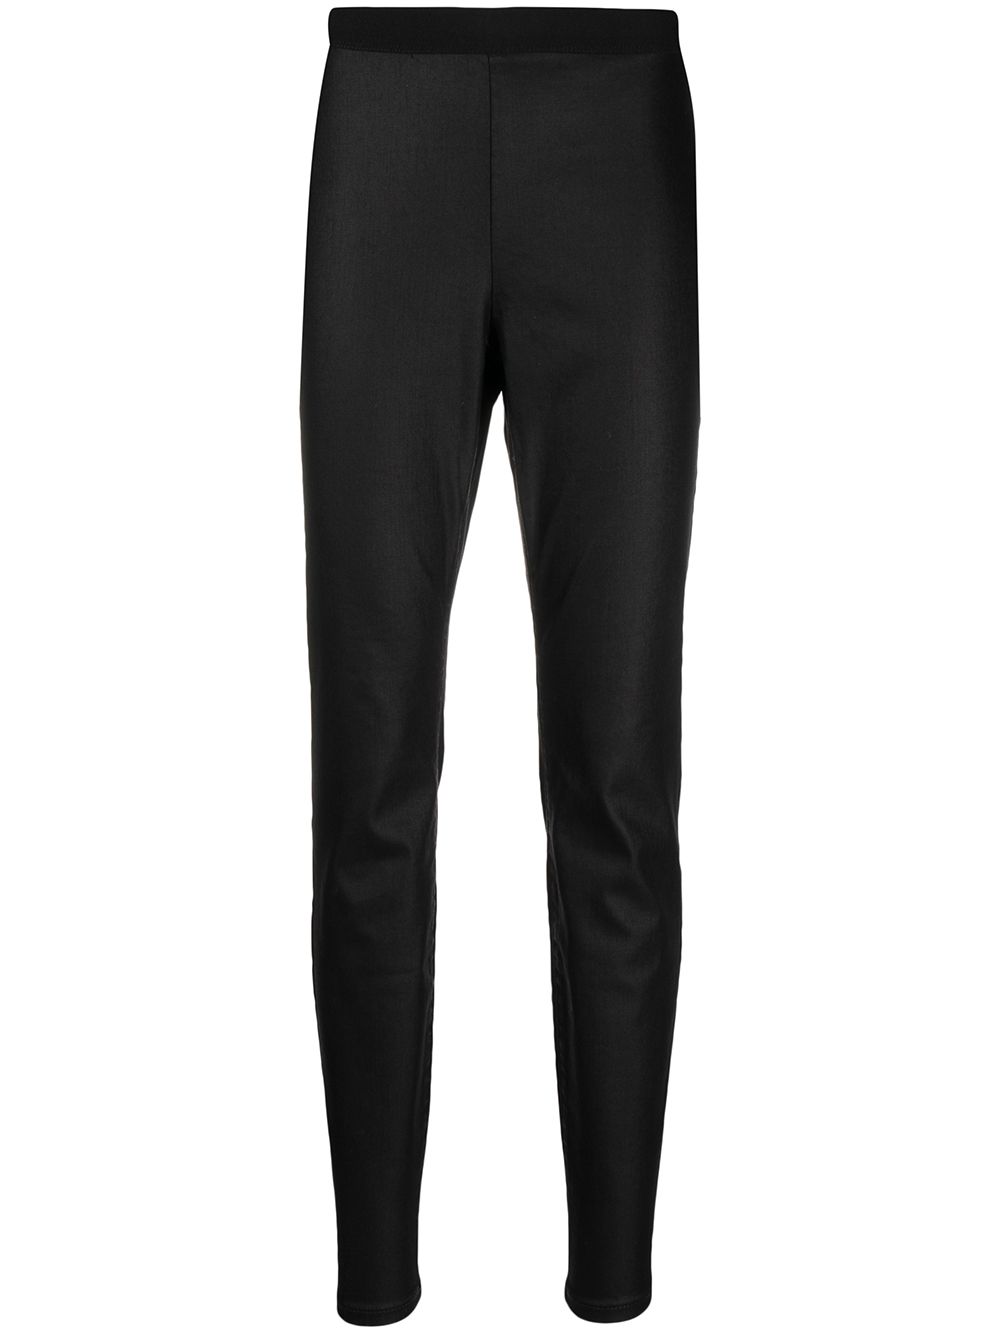 Eileen Fisher High-Rise Slim Fit Trousers - Black